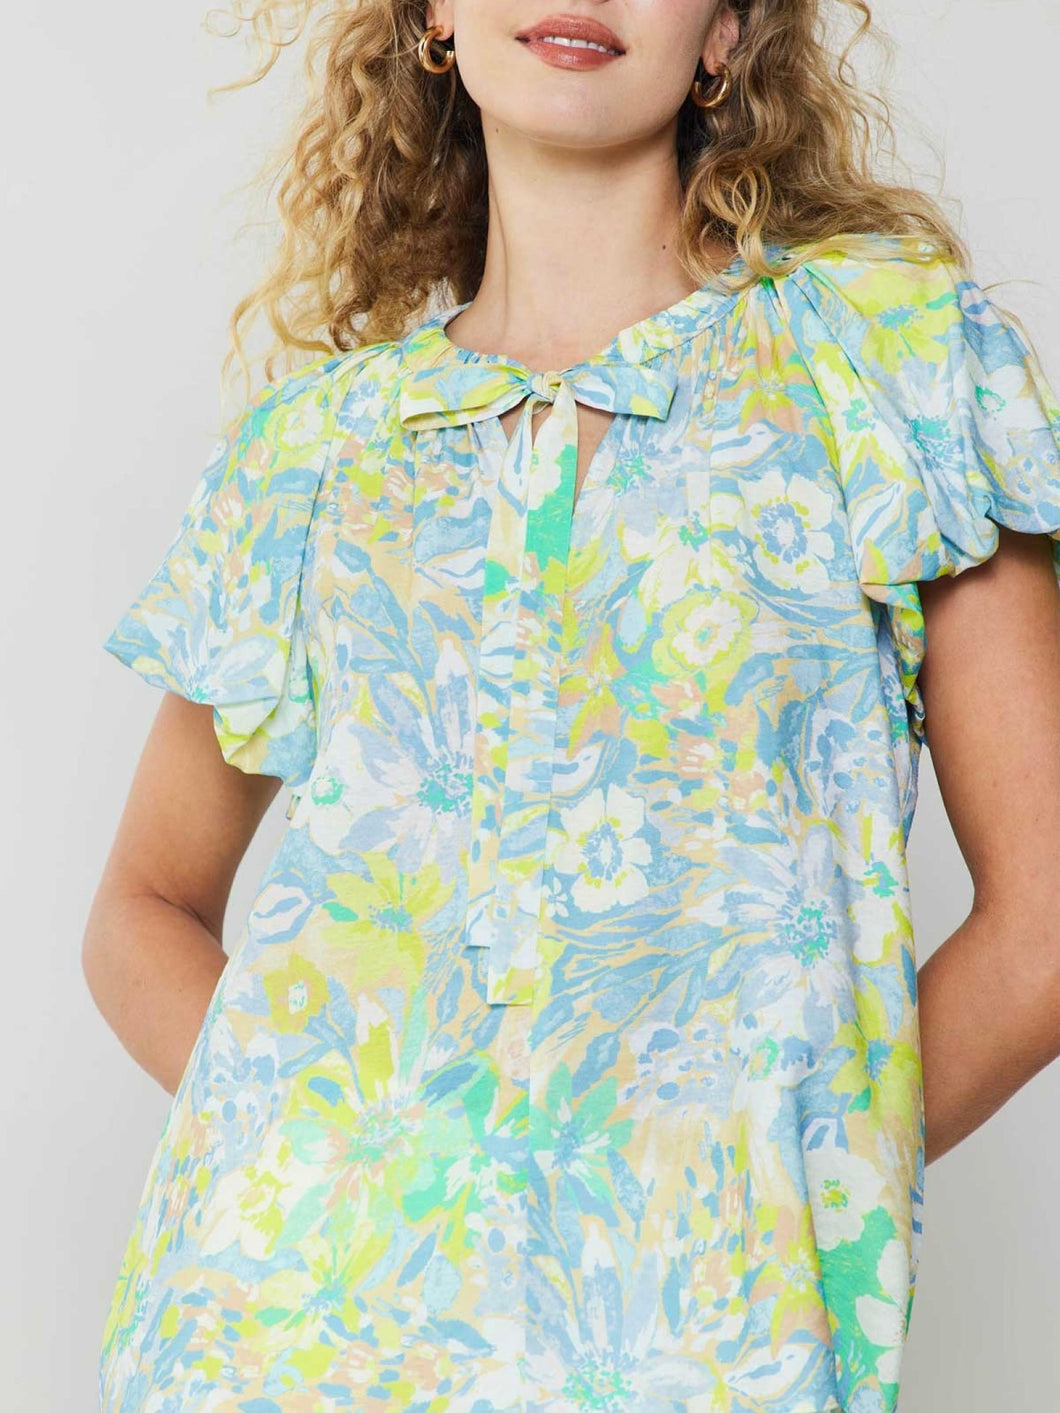 Print Top with Tie - Multi